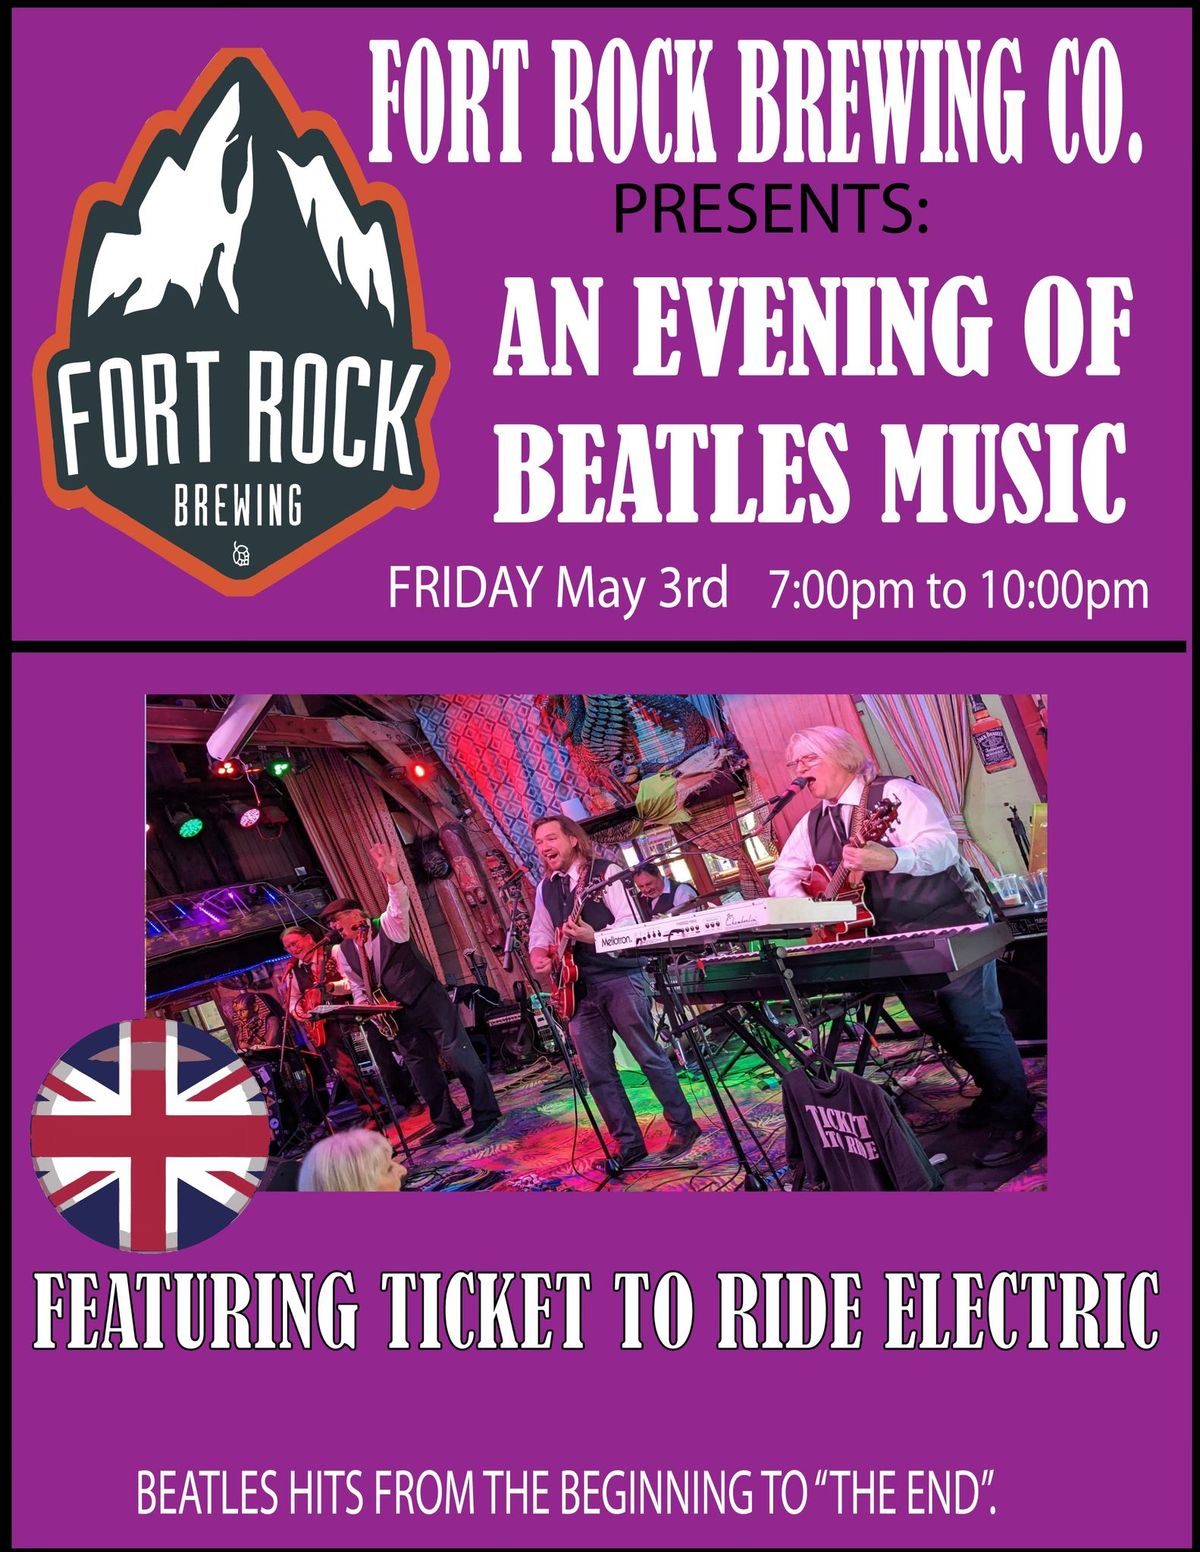 Beatles & Brew!!! Ticket To Ride Electric at Fort Rock Brewing, Friday May 3rd, 7 to 10 PM!!!